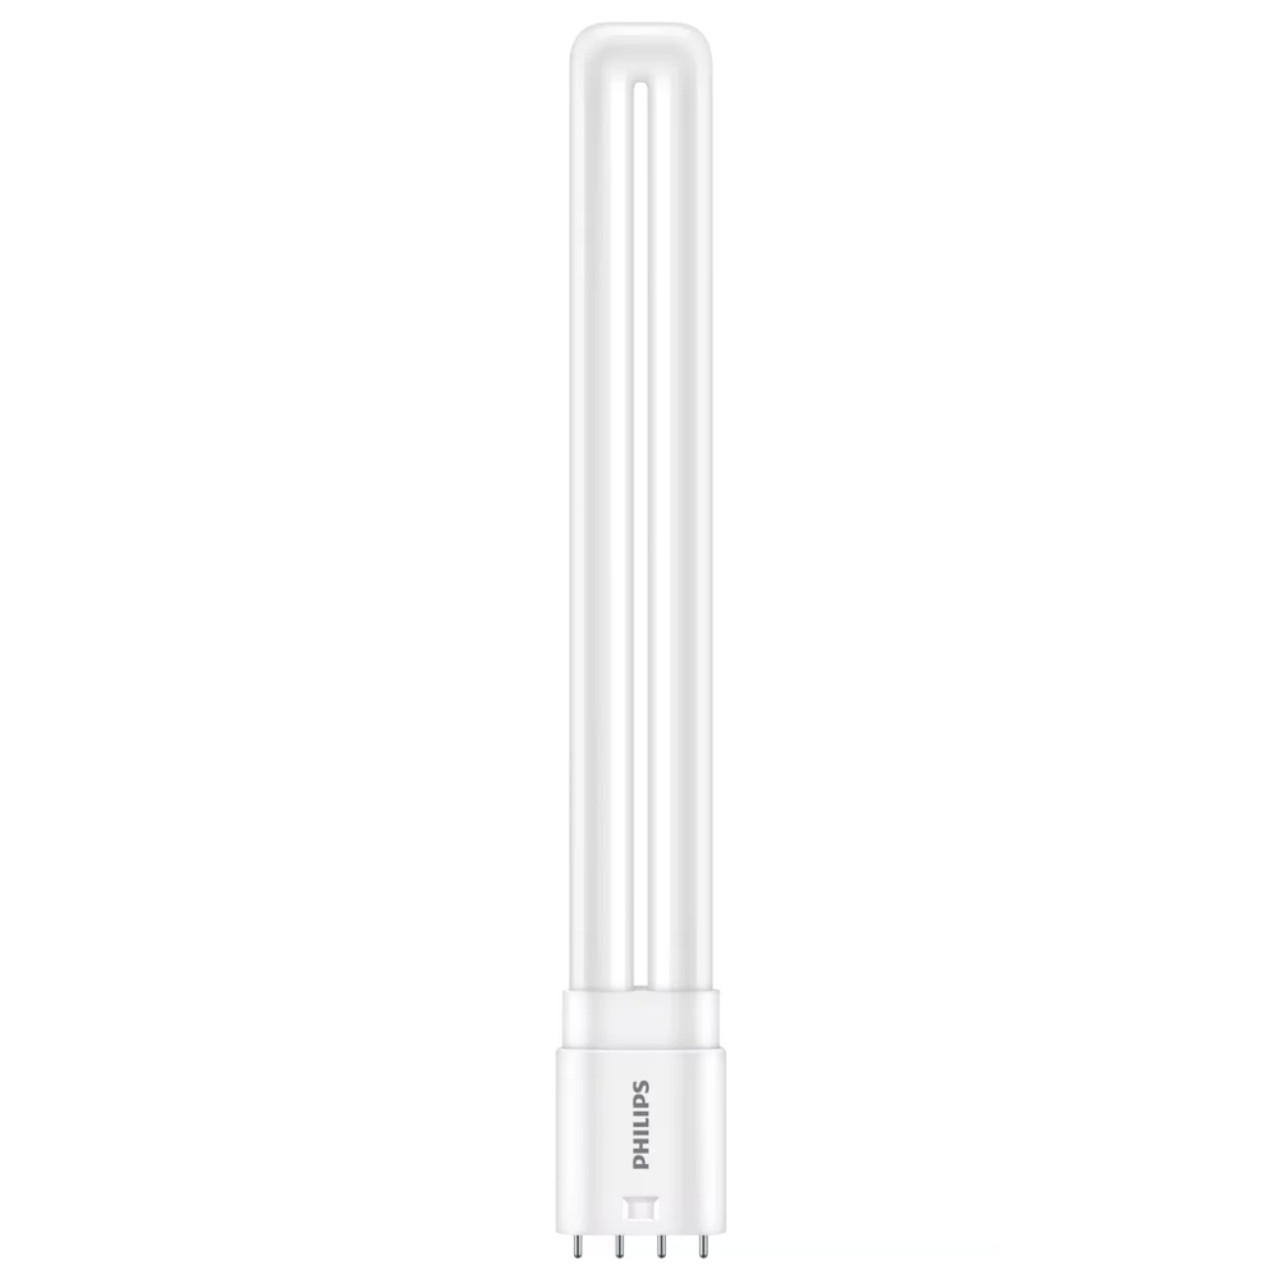 CorePro LED PLL 12W (24W eqv.) 840 4P 2G11 High Frequency Philips